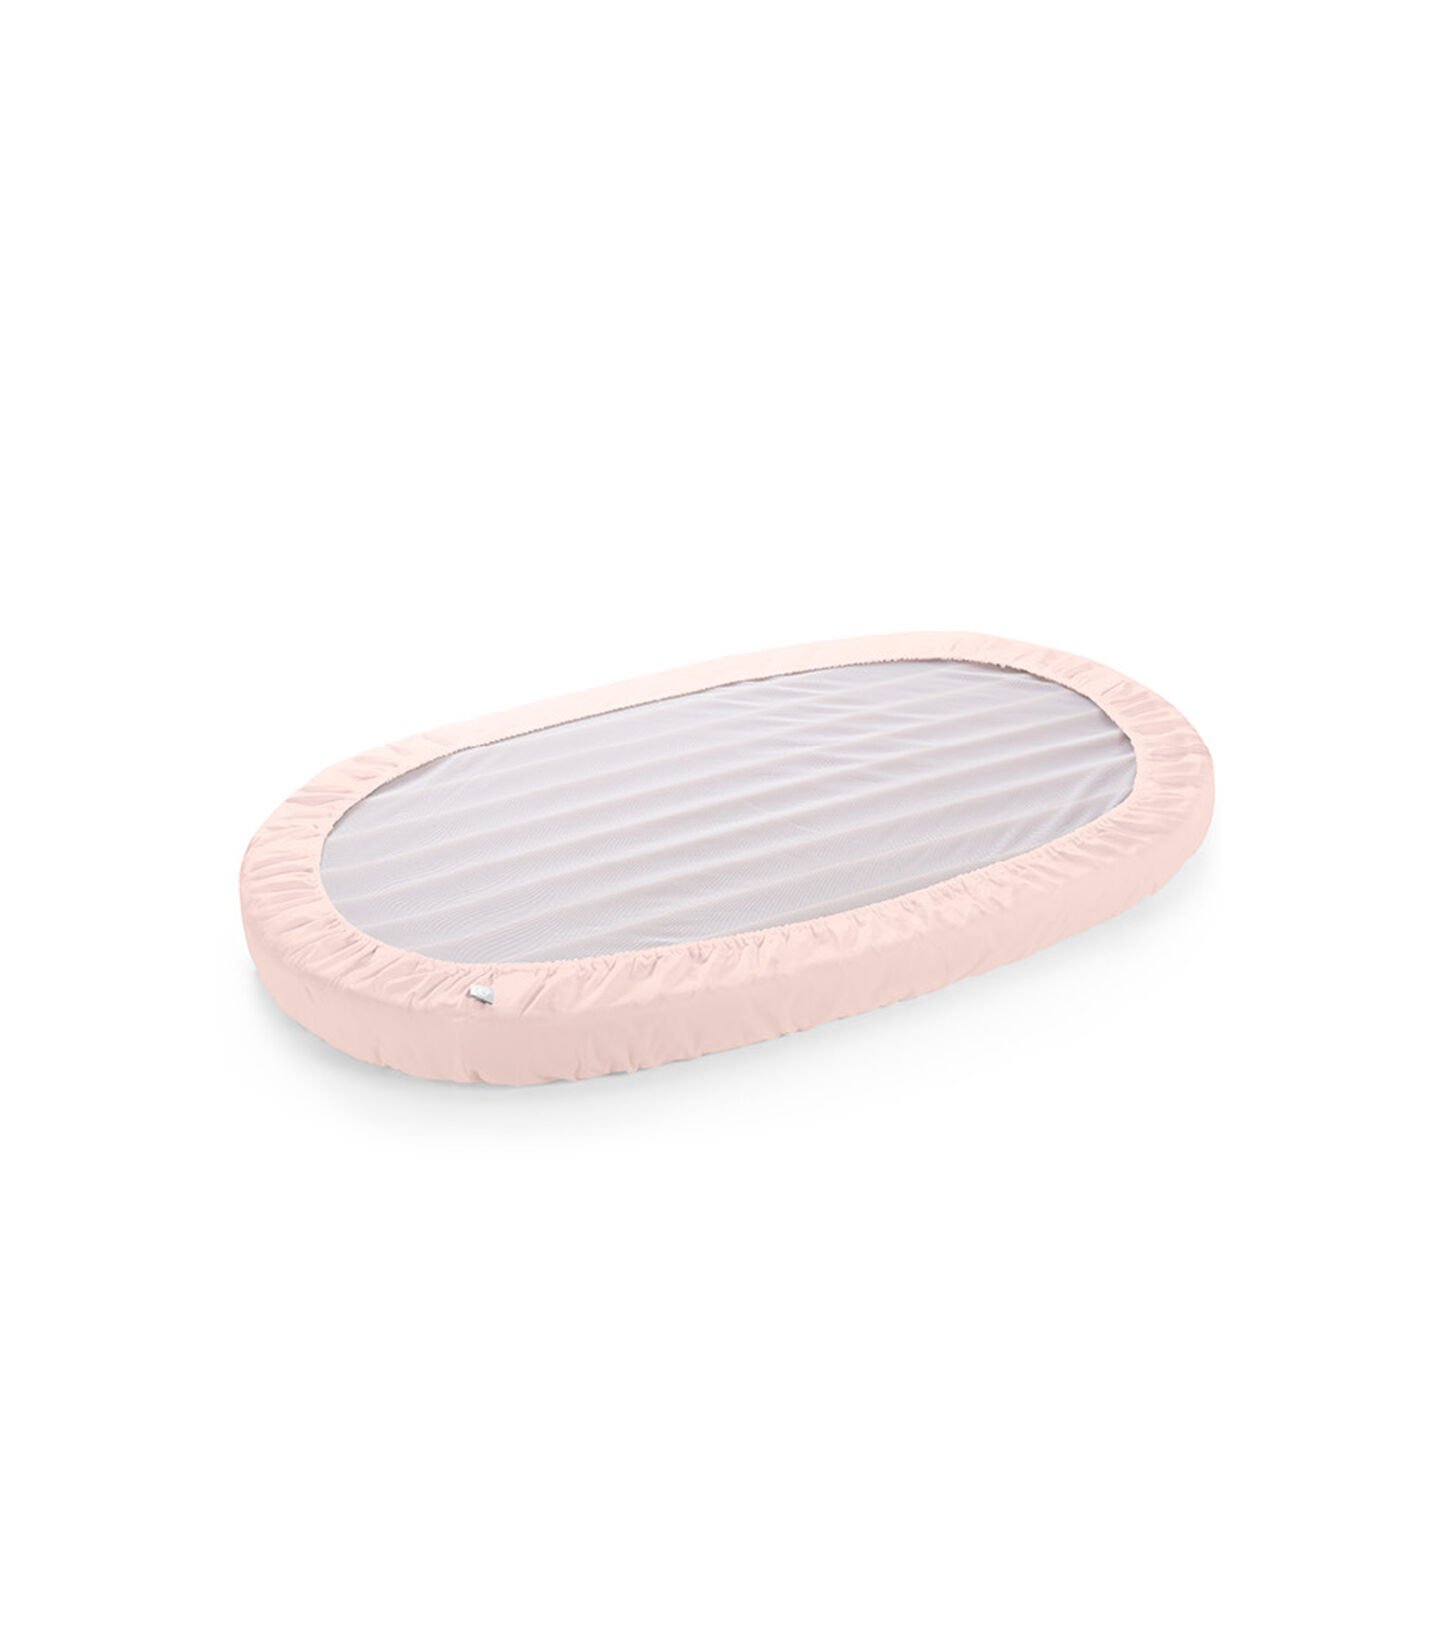 Stokke® Sleepi™ Fitted Sheet Pink, Персиково-розовый, mainview view 3